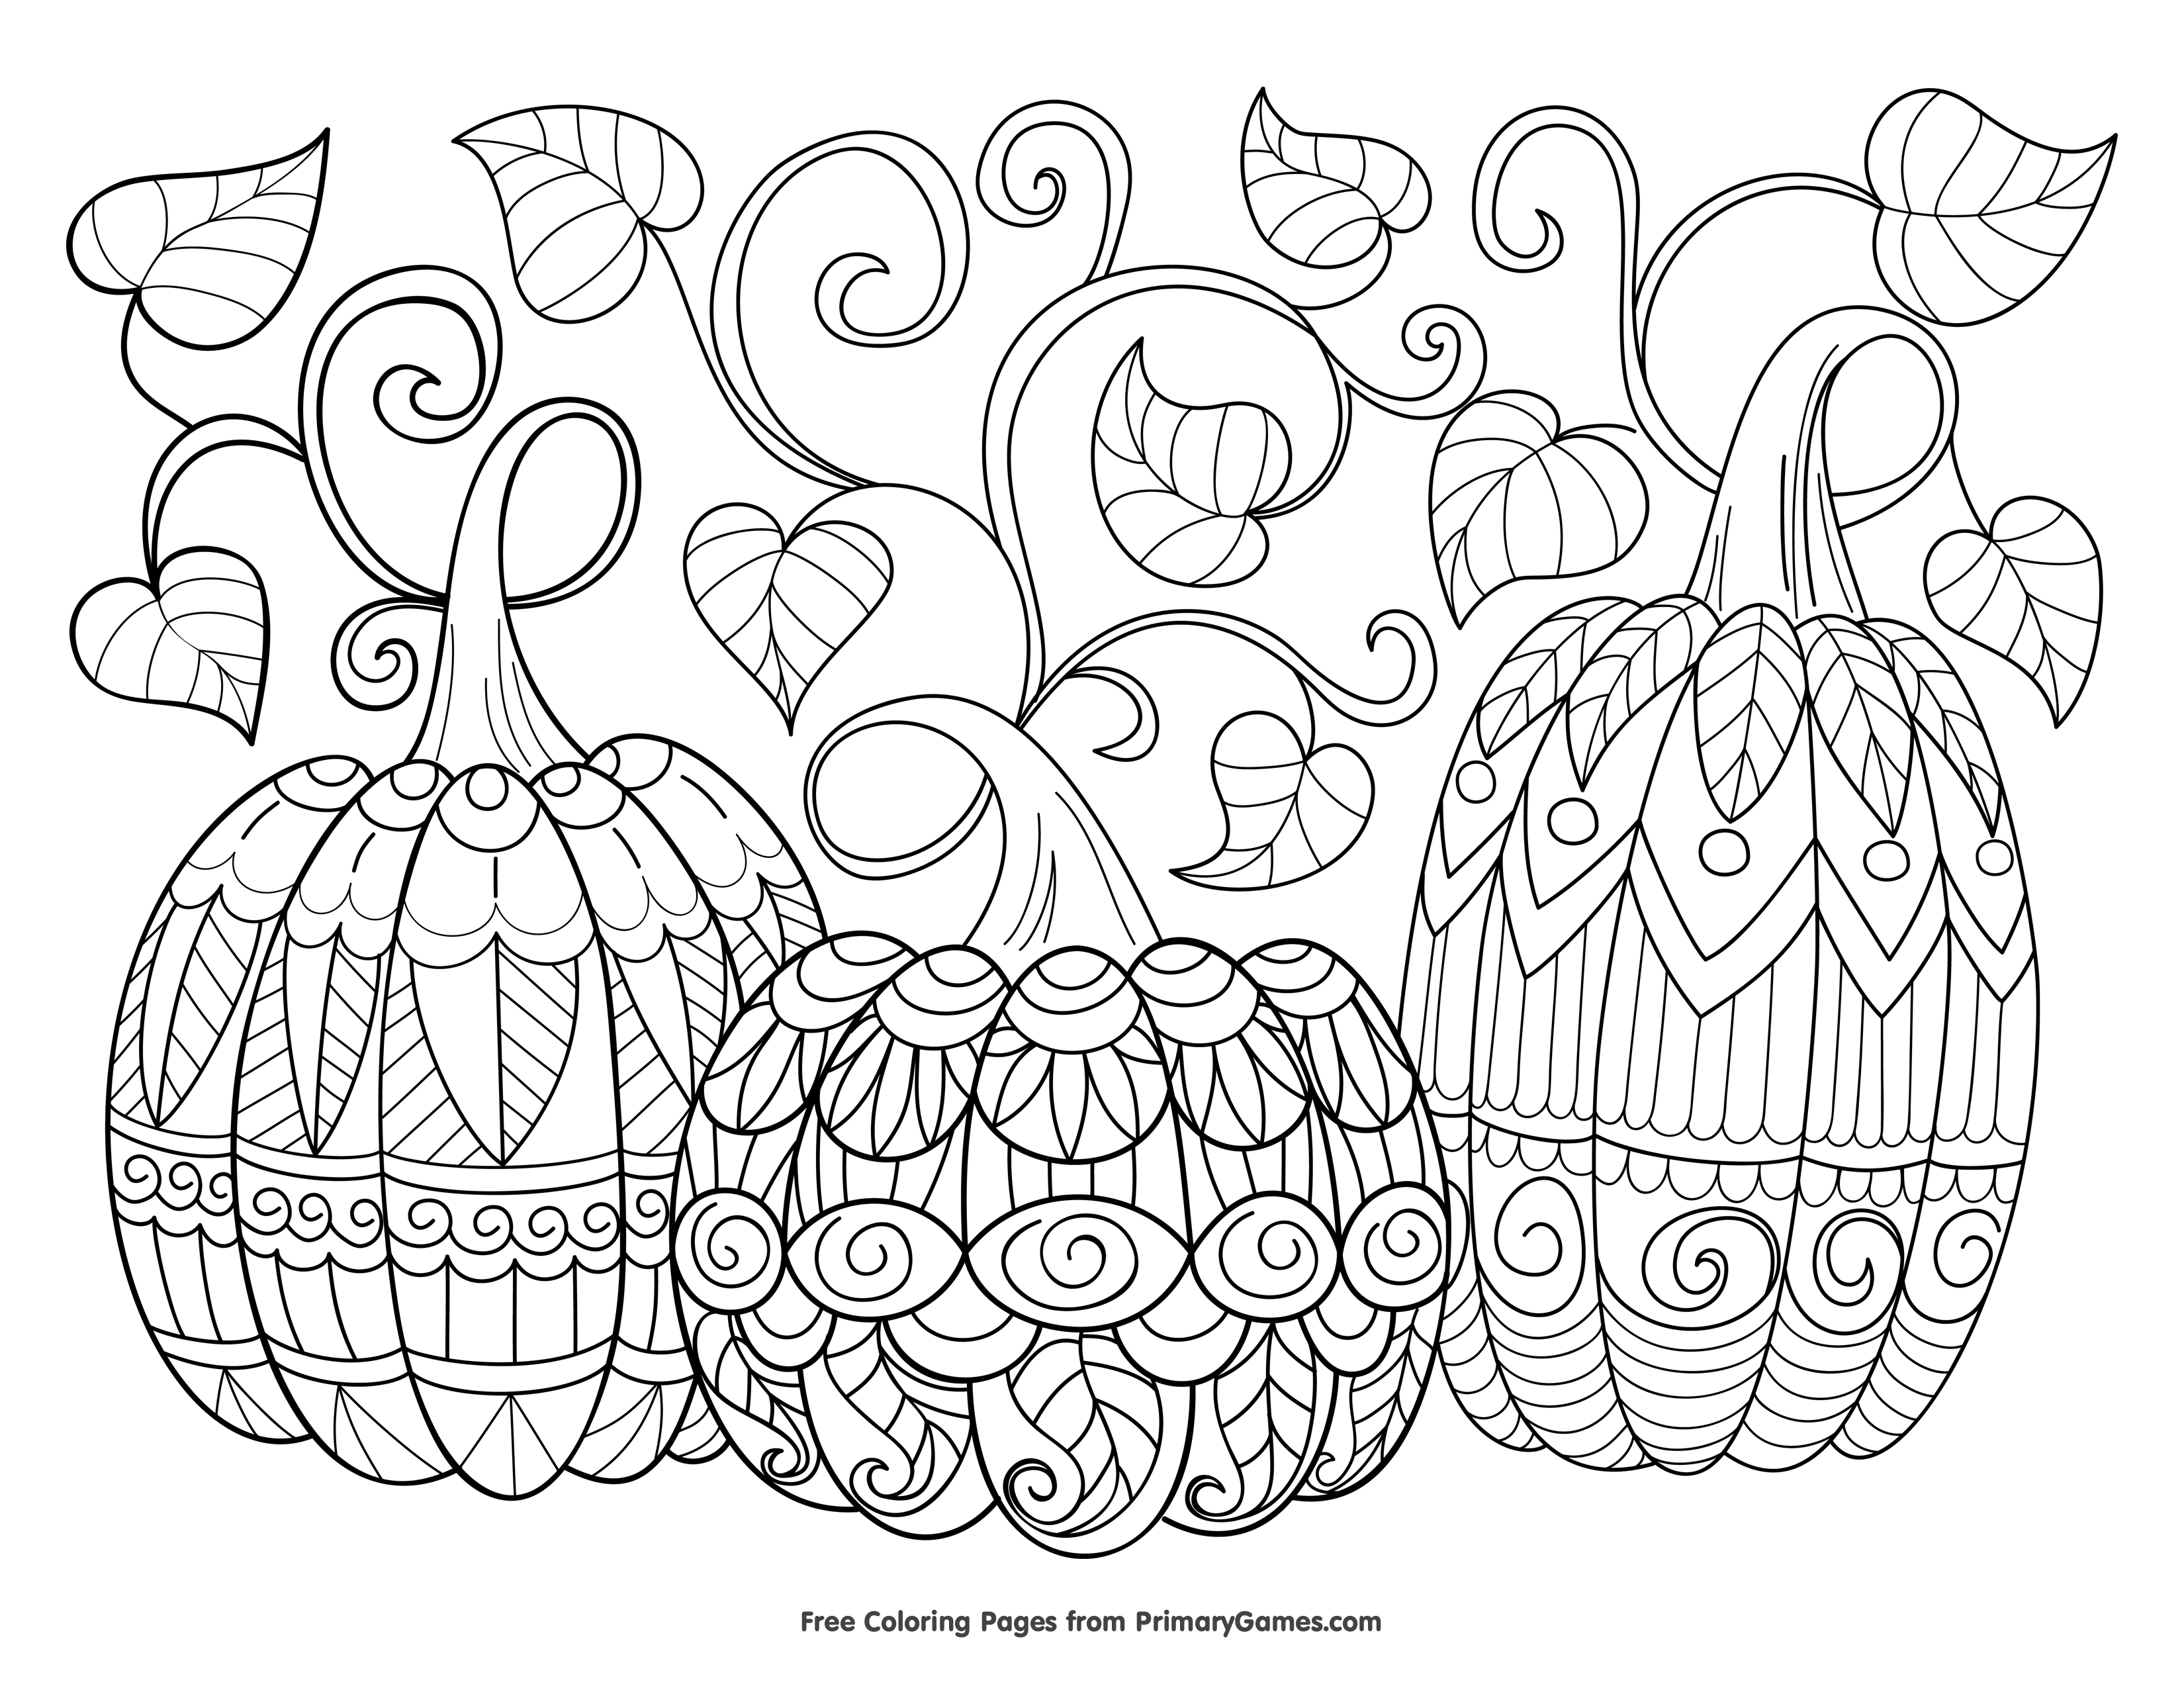 FREE Halloween Coloring Pages for Adults & Kids - Happiness is